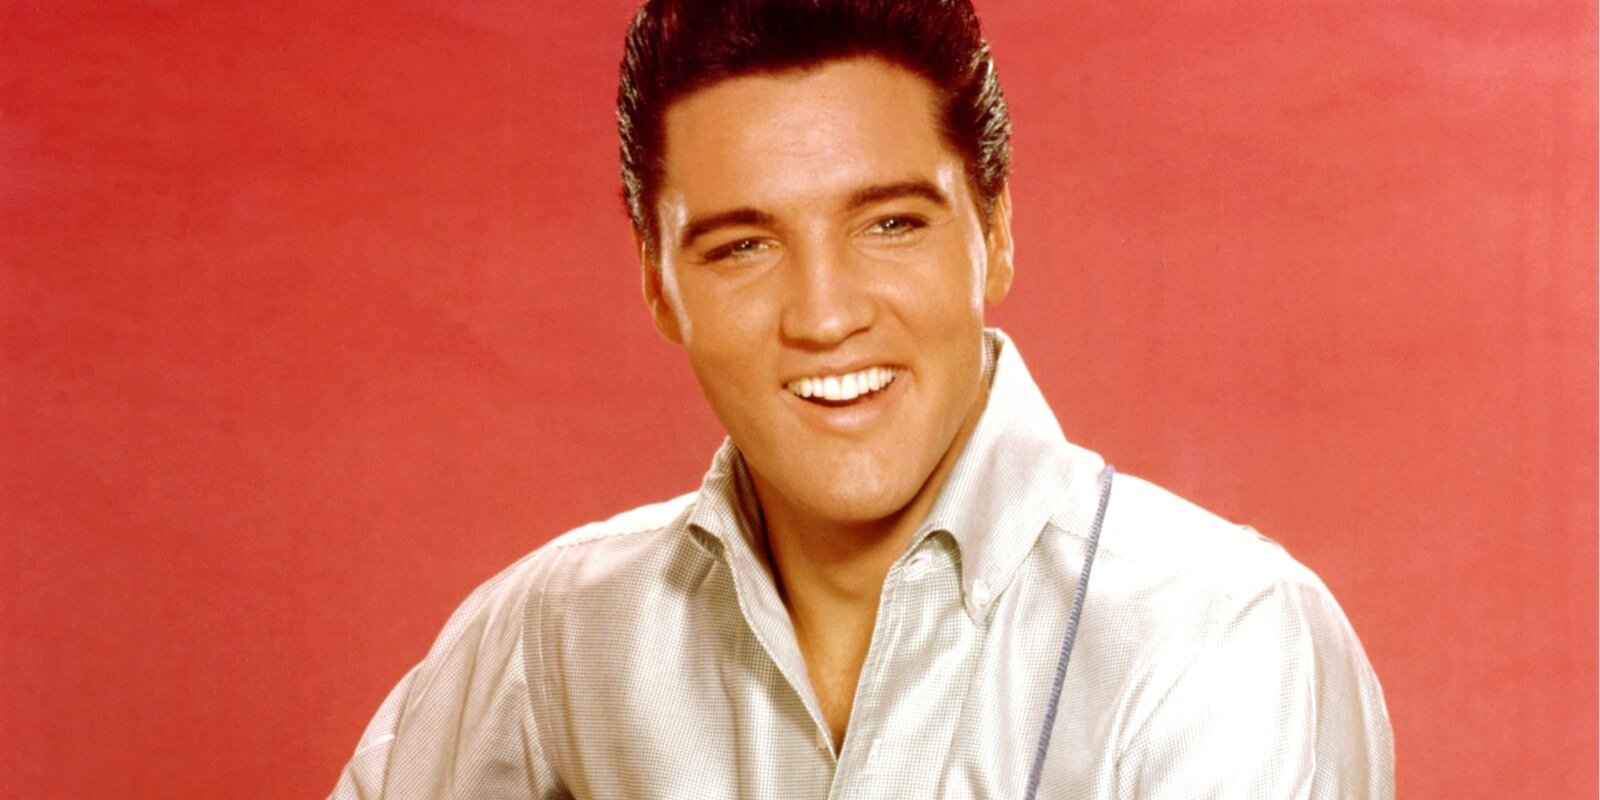 Elvis Presley photographed in September 1962 in Culver City, California at MGM Studios.